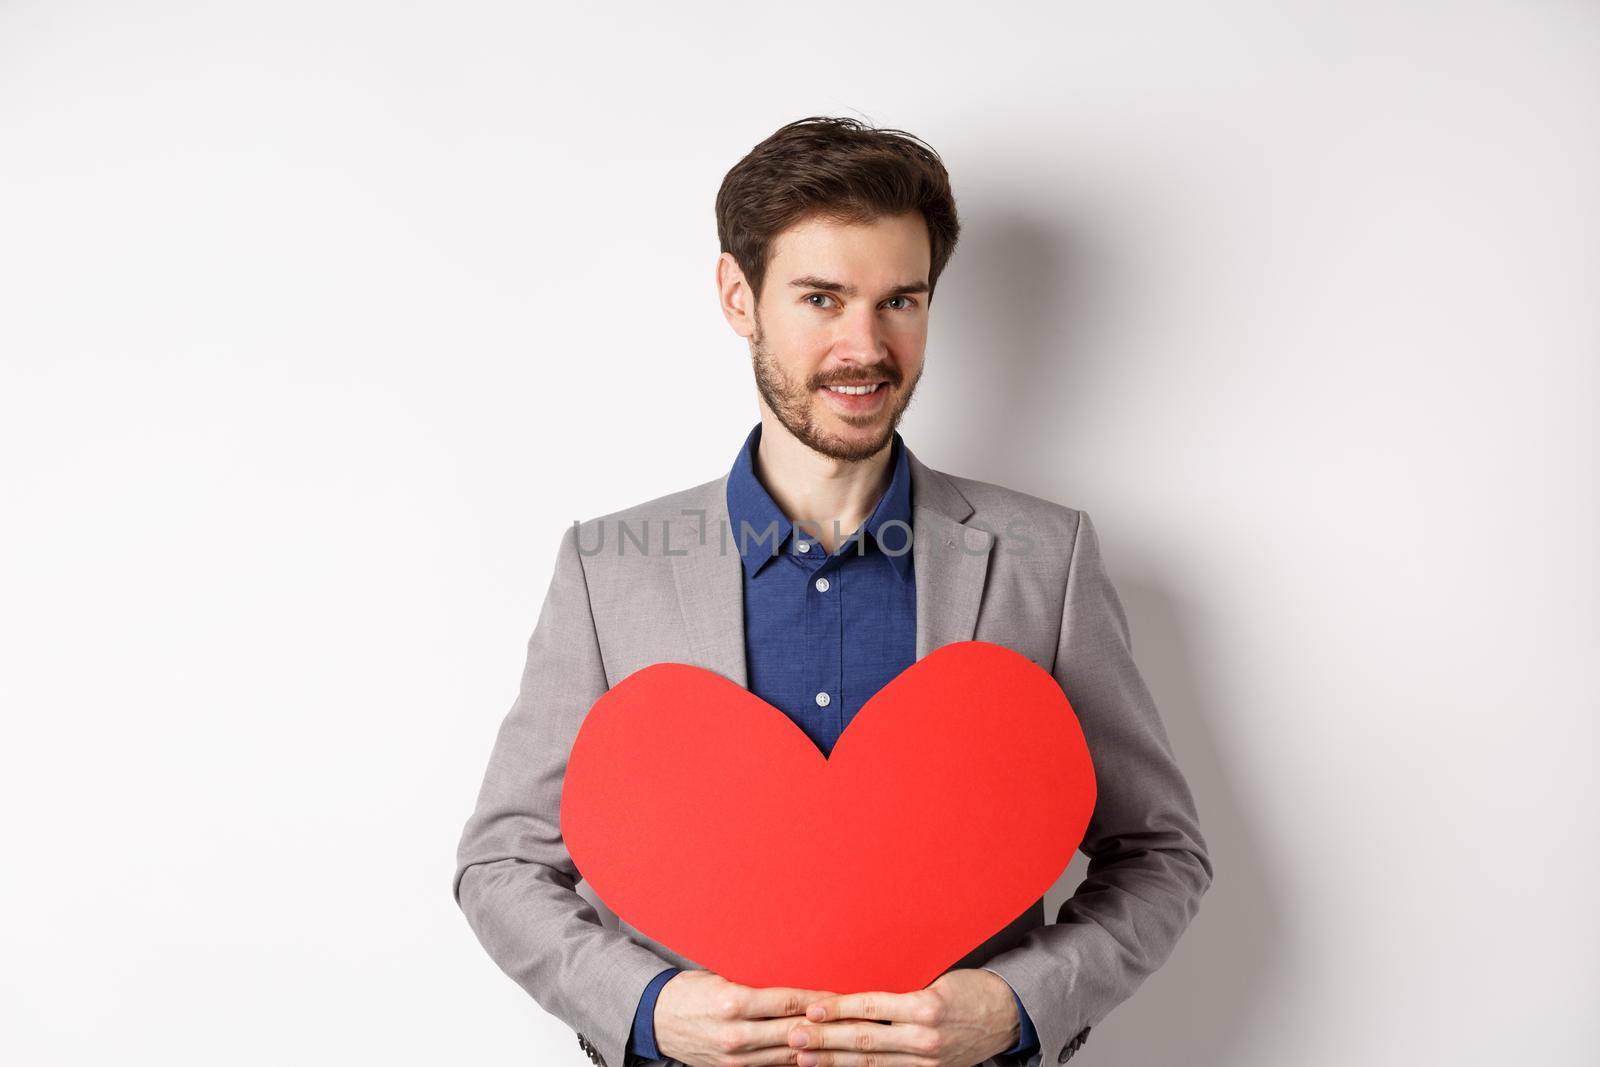 Handsome bearded man wishing happy valentines day, holding red heart cutout and smiling, going on romantic date in fancy suit, standing over white background.